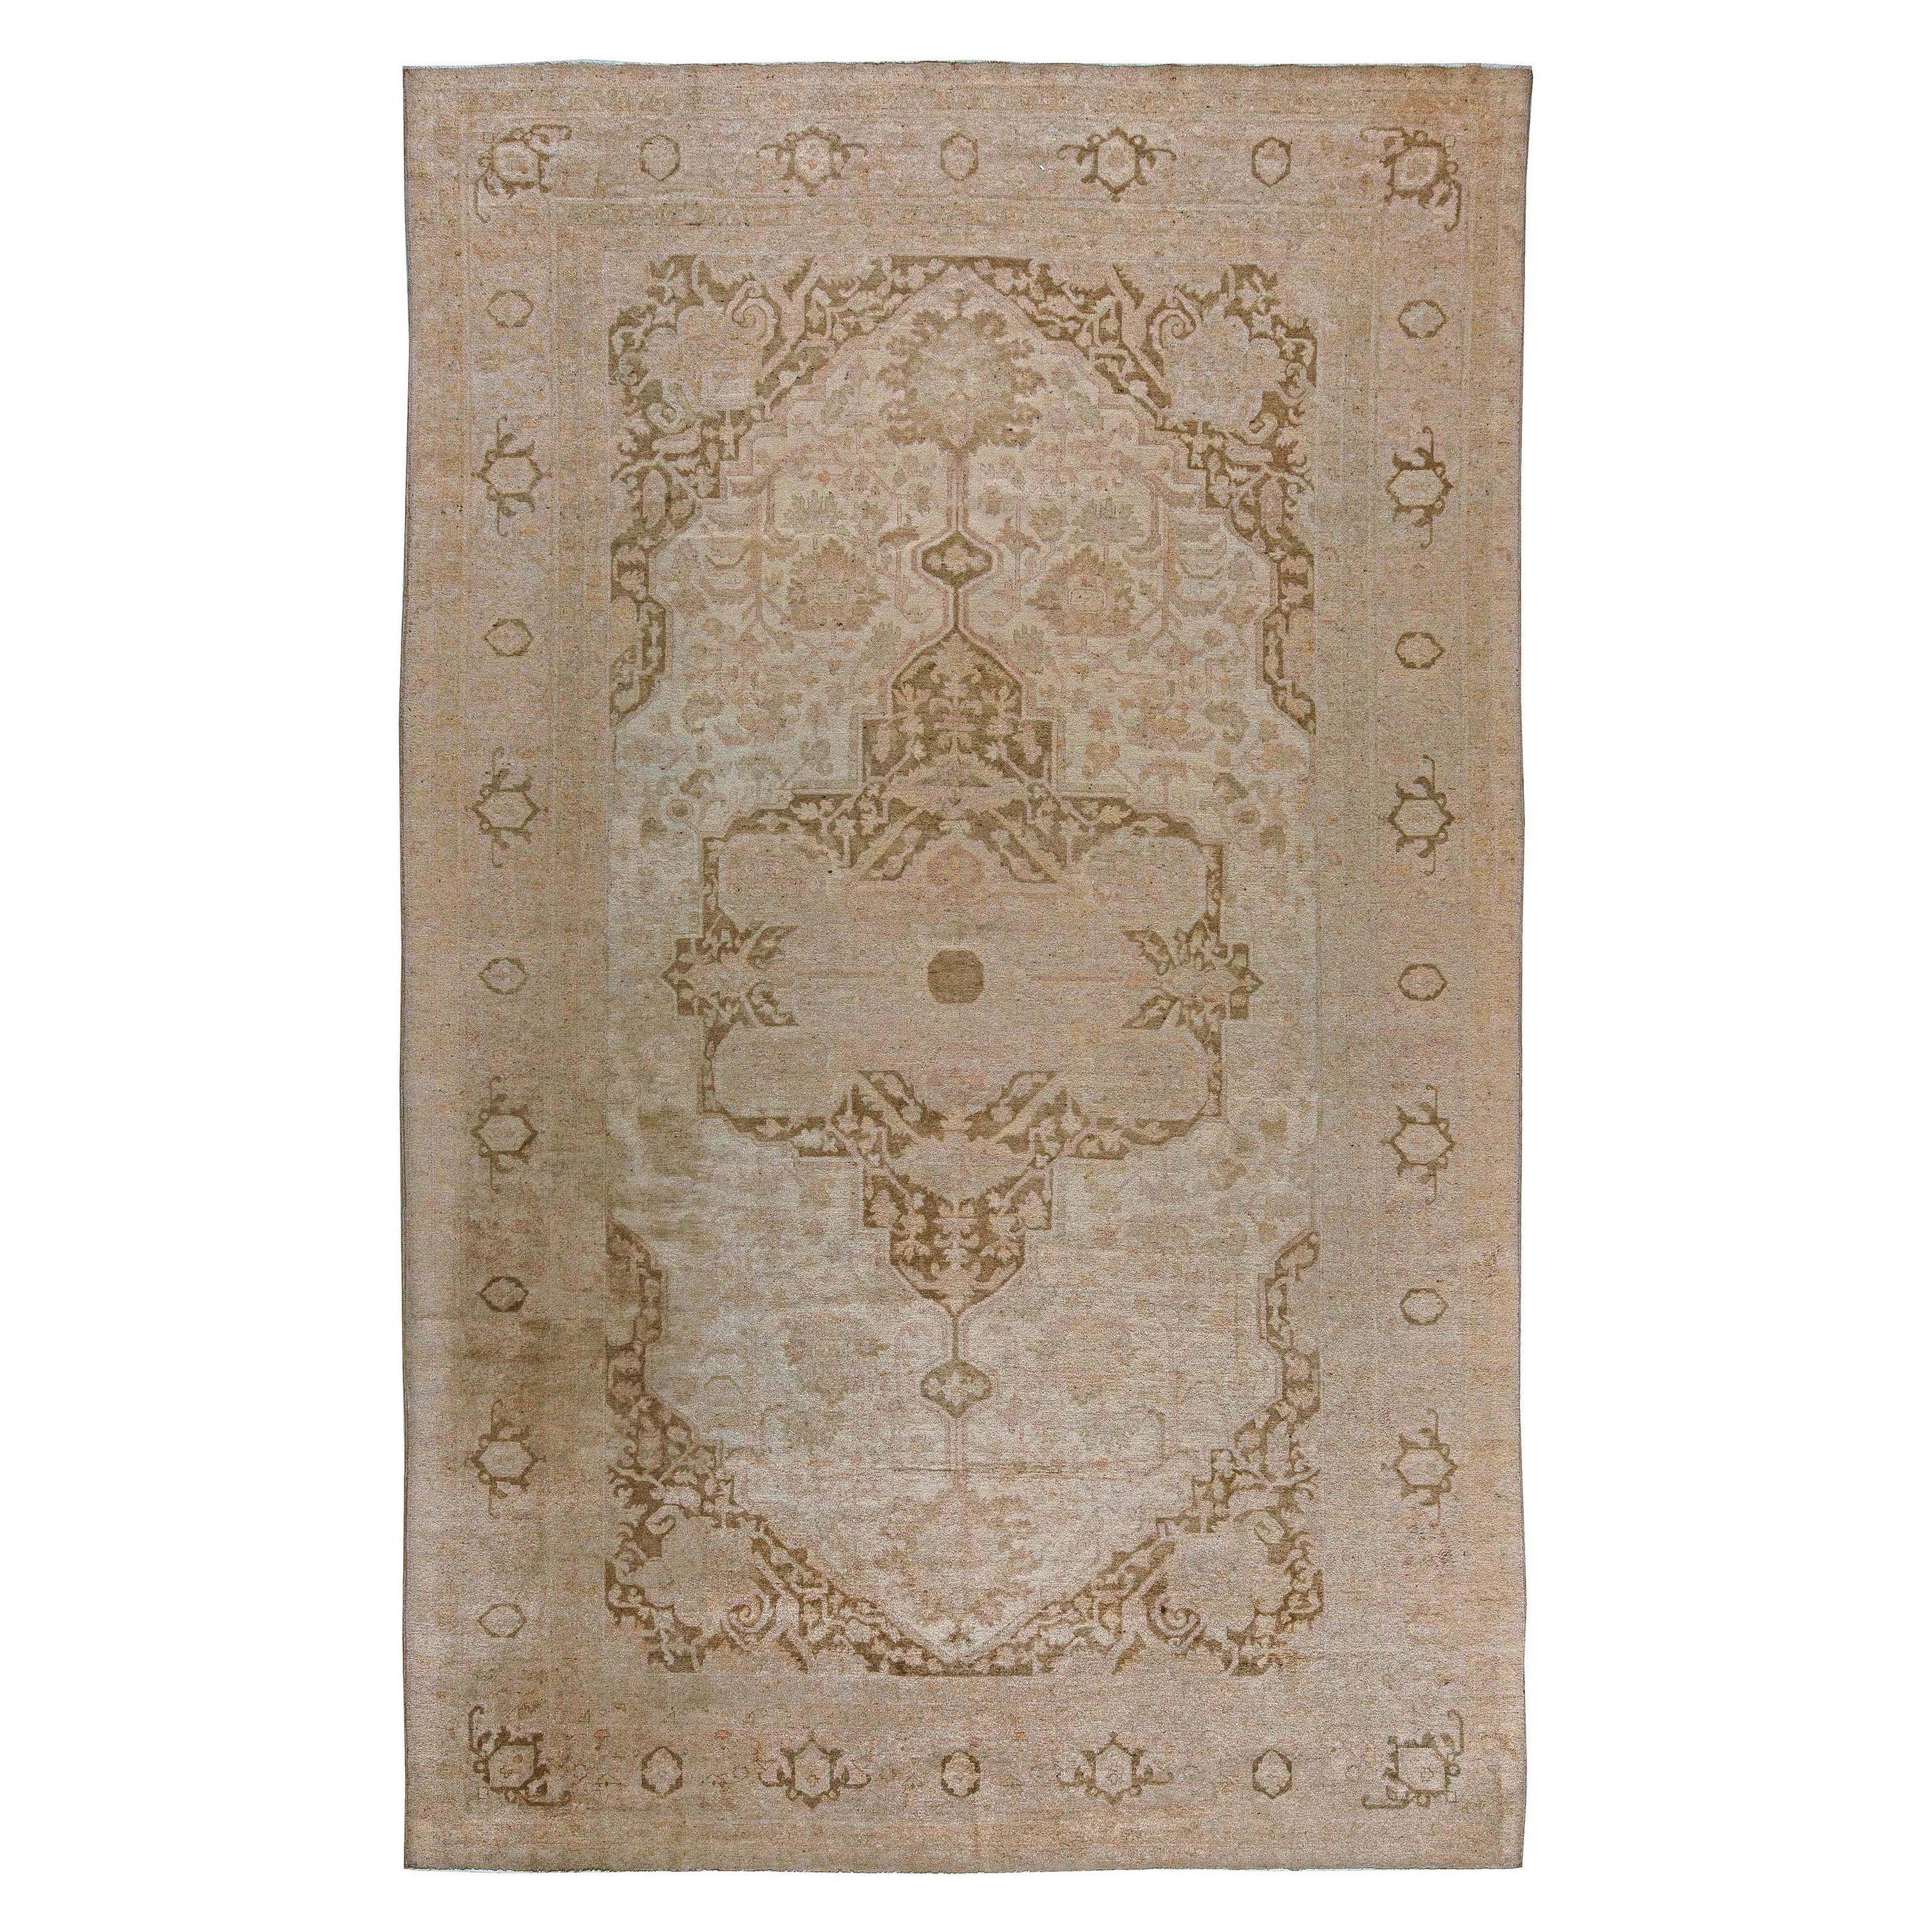 Antique Indian Amritsar Handwoven Wool Rug For Sale